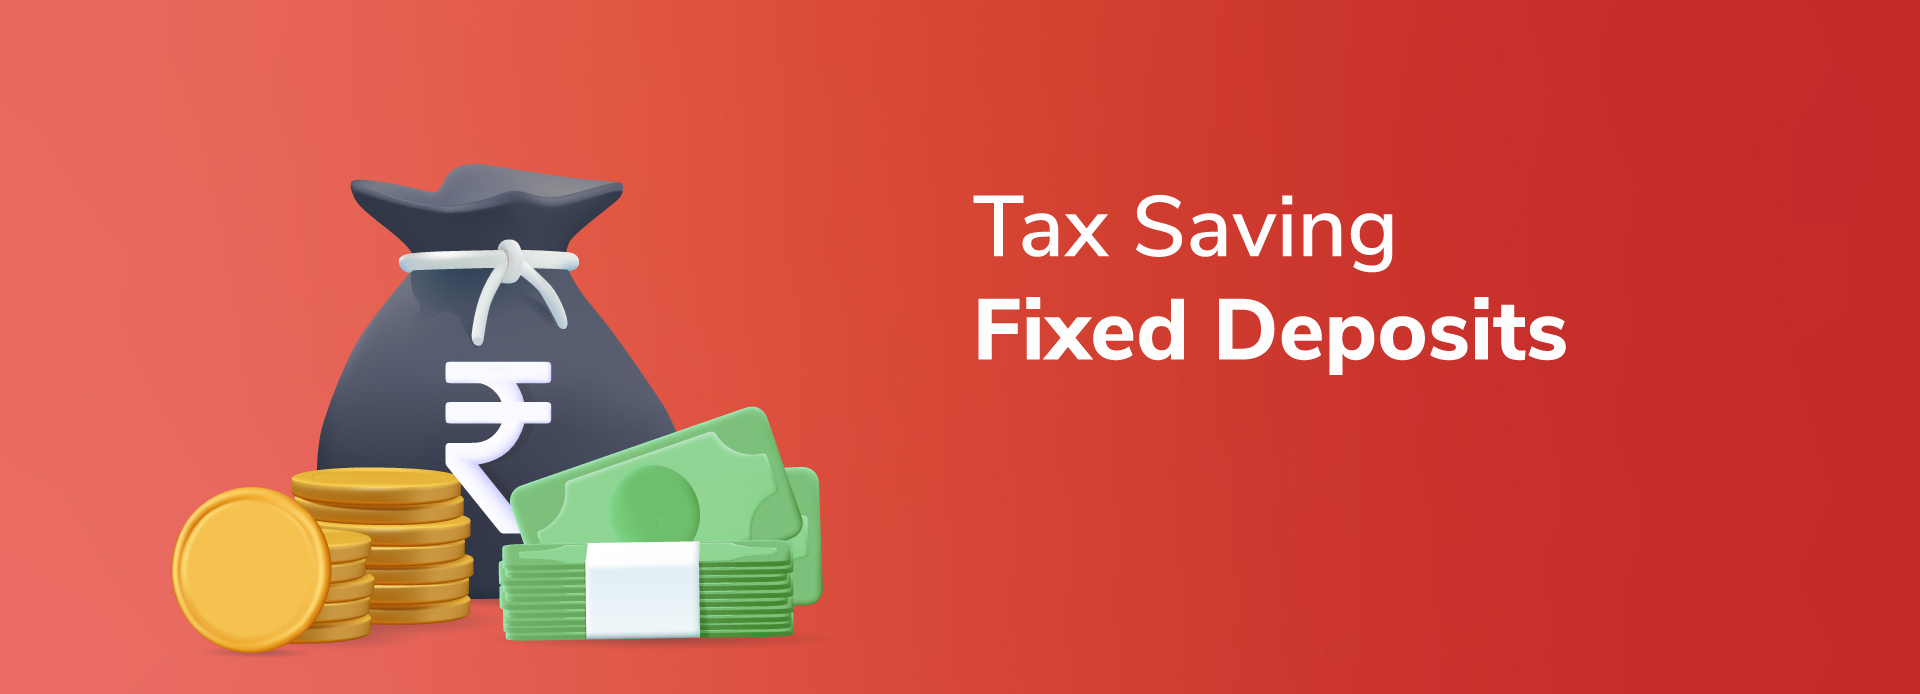 Benefits of Investing in Tax-Saving Fixed Deposits 